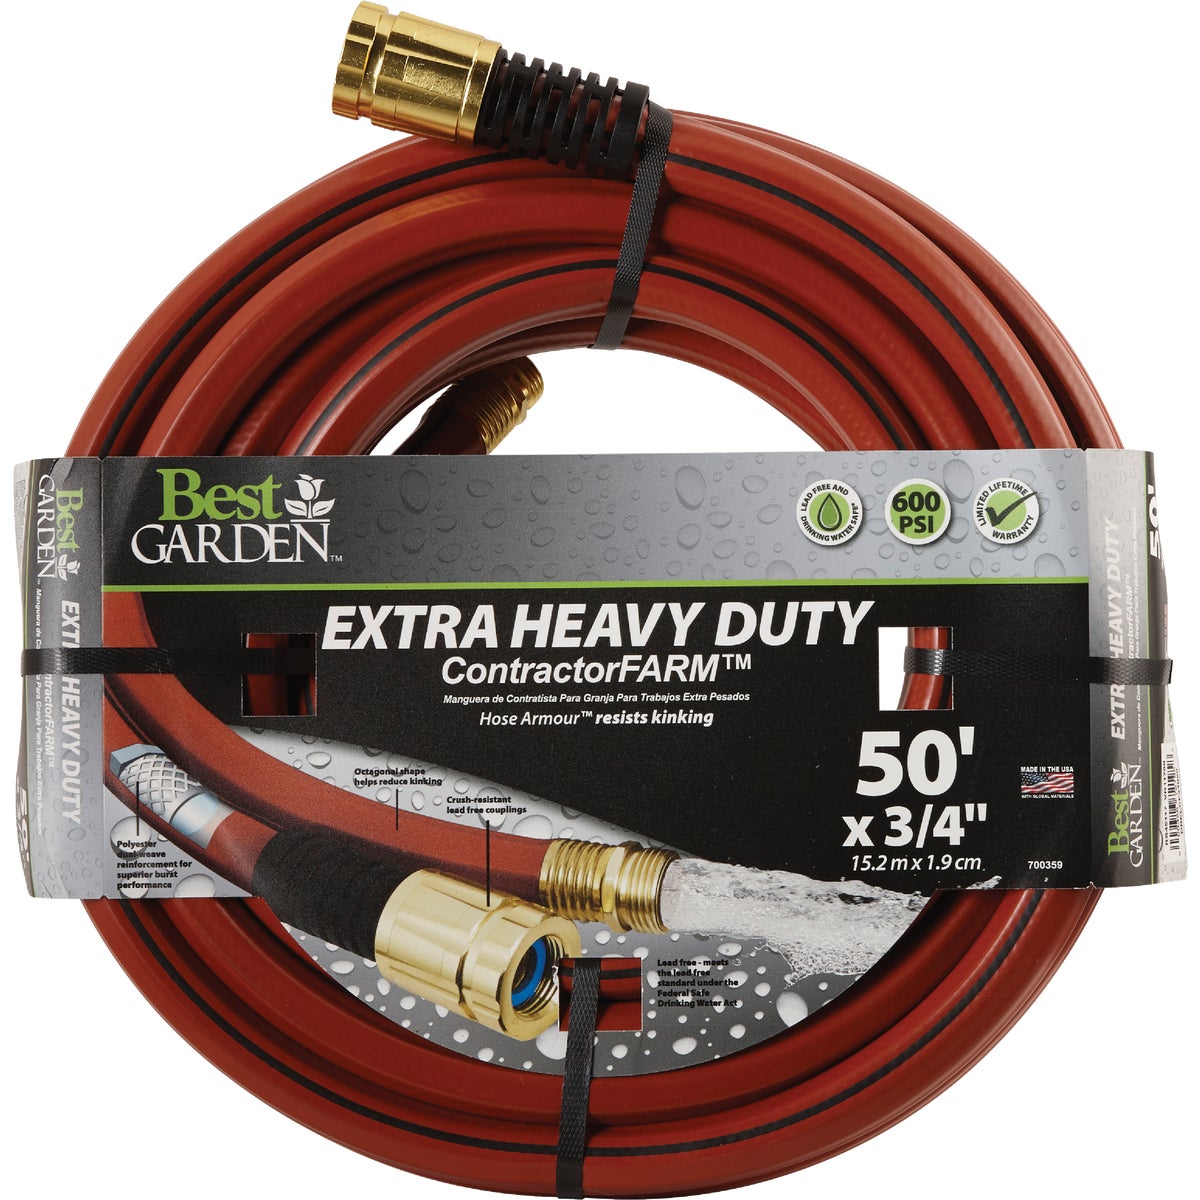 Item 700359, Contractor hose. Features polyester dual weave reinforcement.